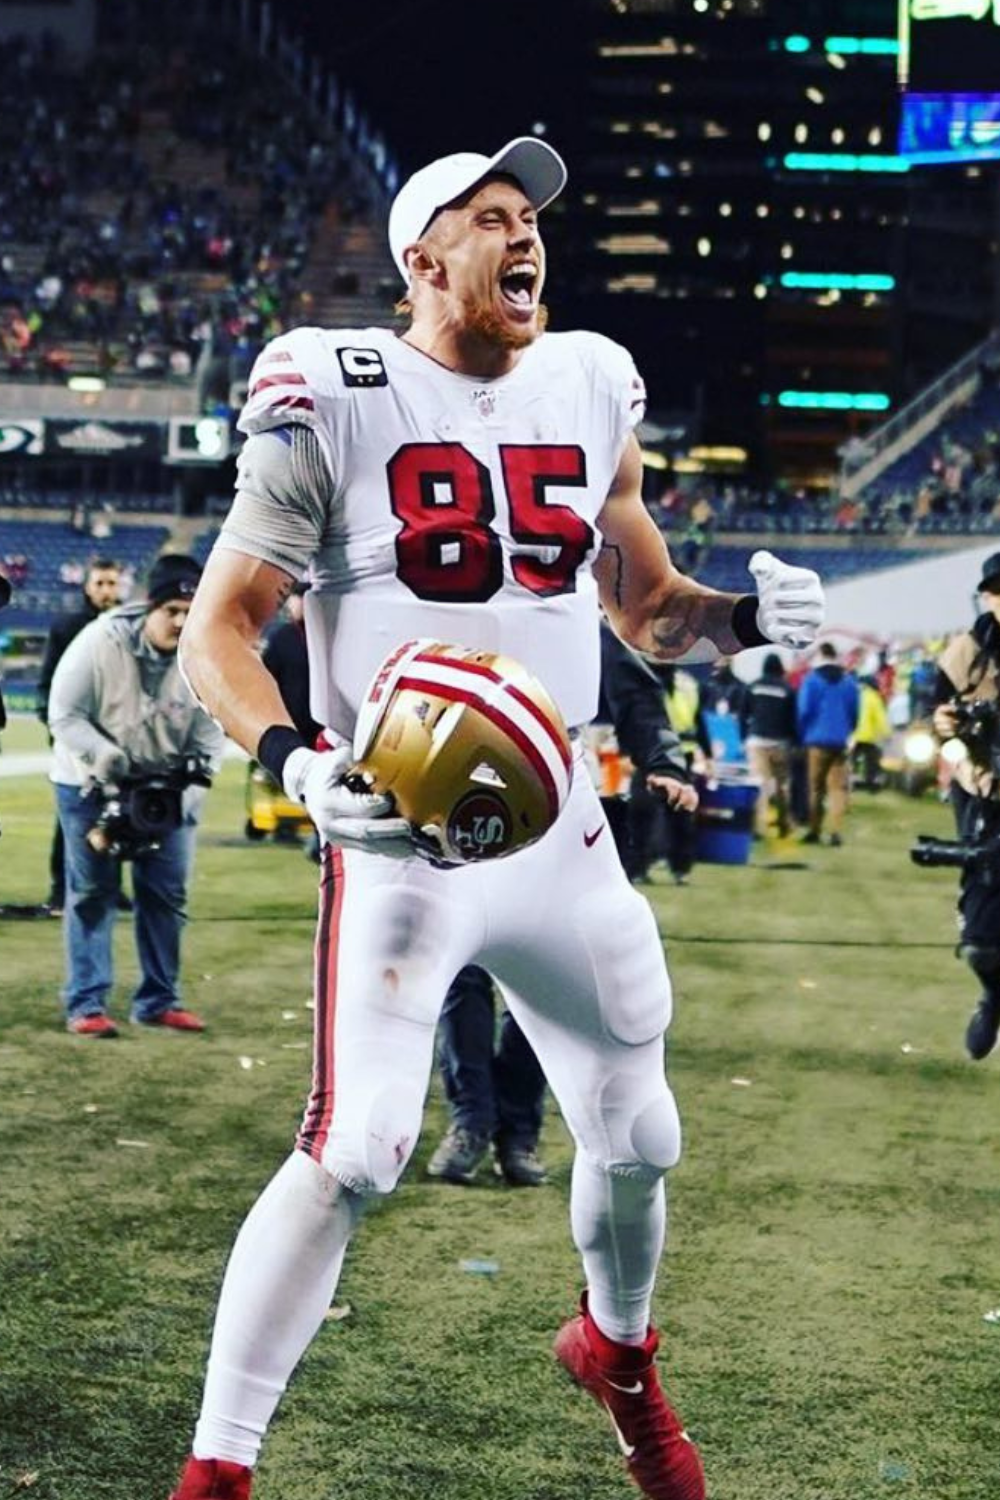 George Kittle, A Professional Football Tight End For The 49ers